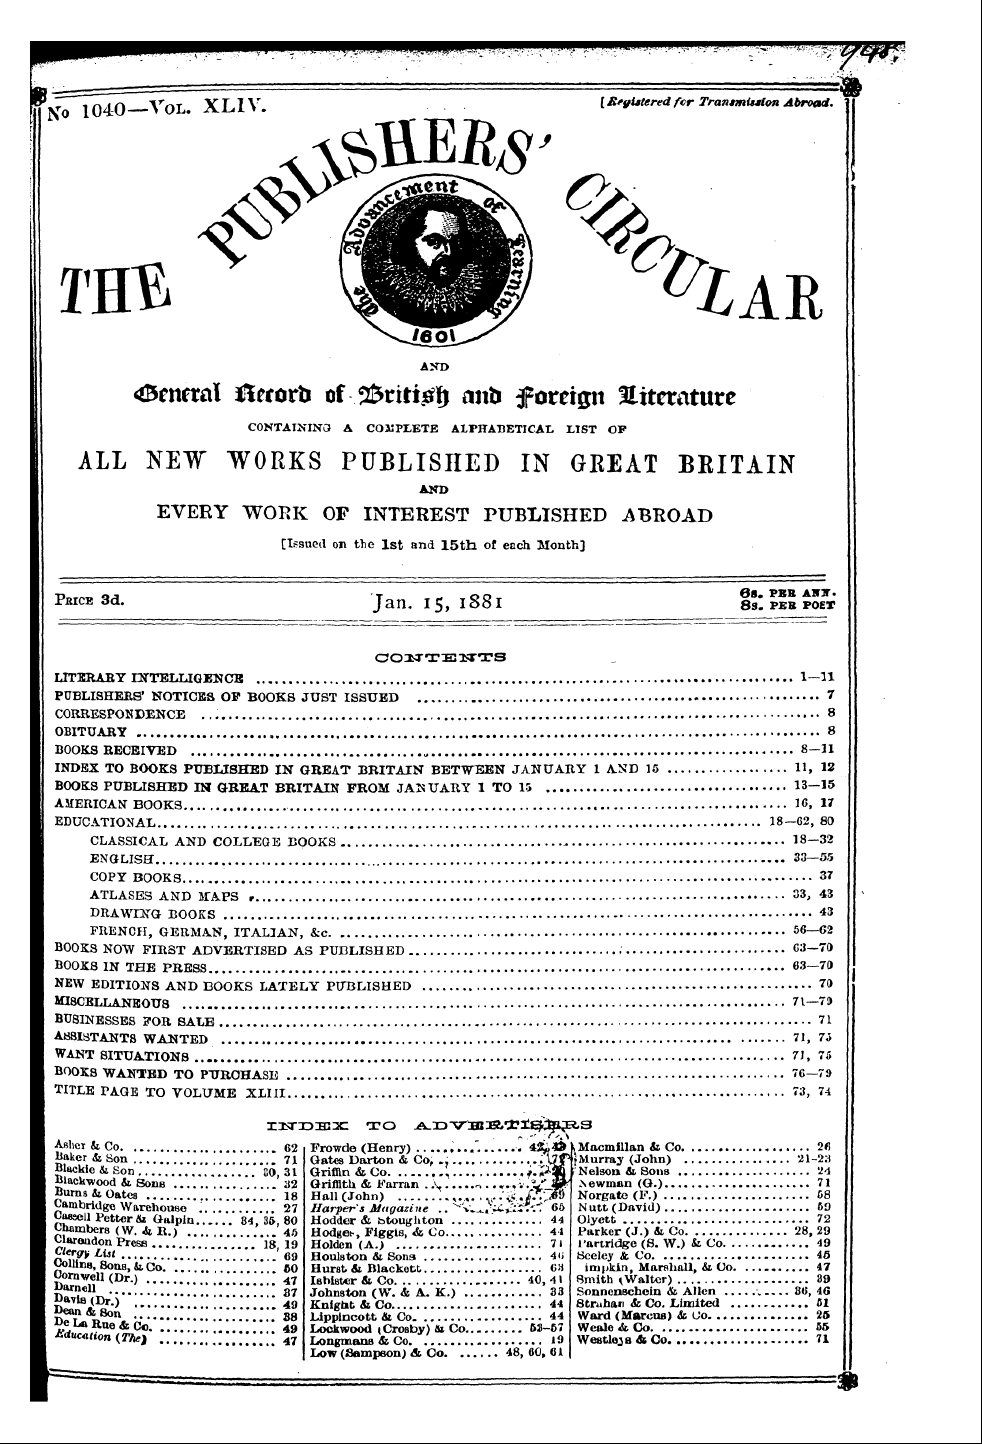 Publishers’ Circular (1880-1890): jS F Y, 1st edition - I Ooutents